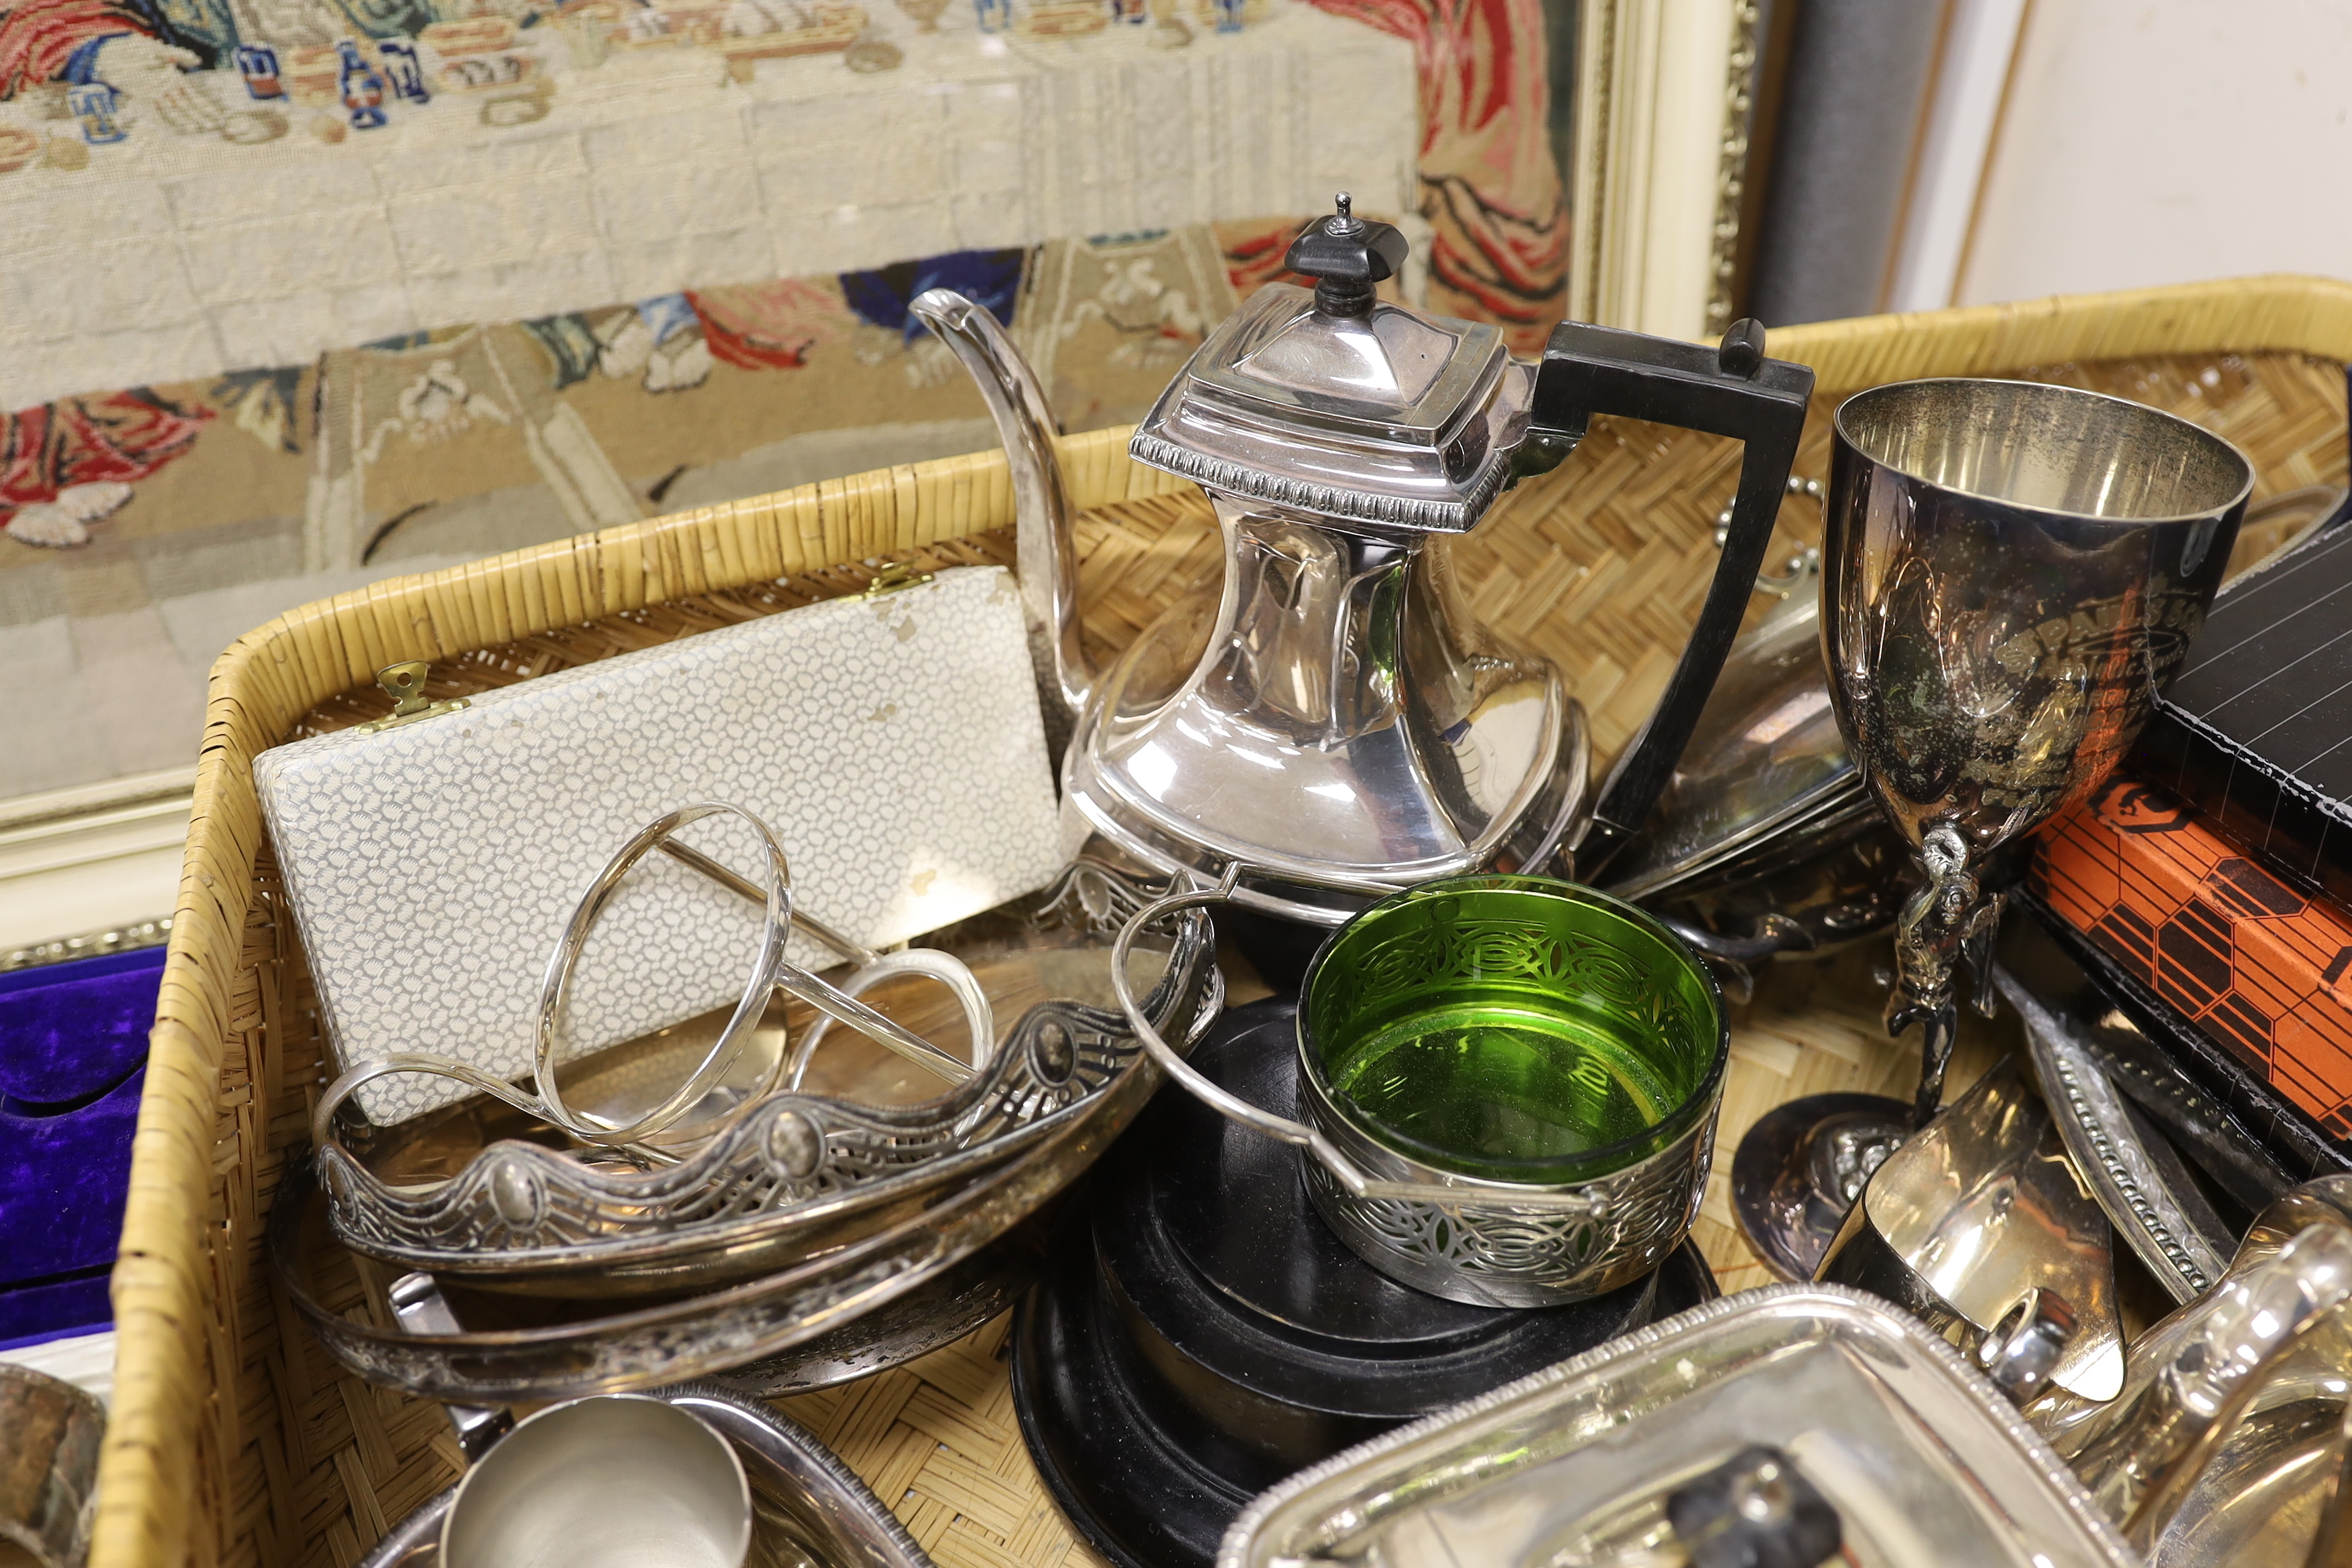 A quantity of assorted silver plated ware and some small silver